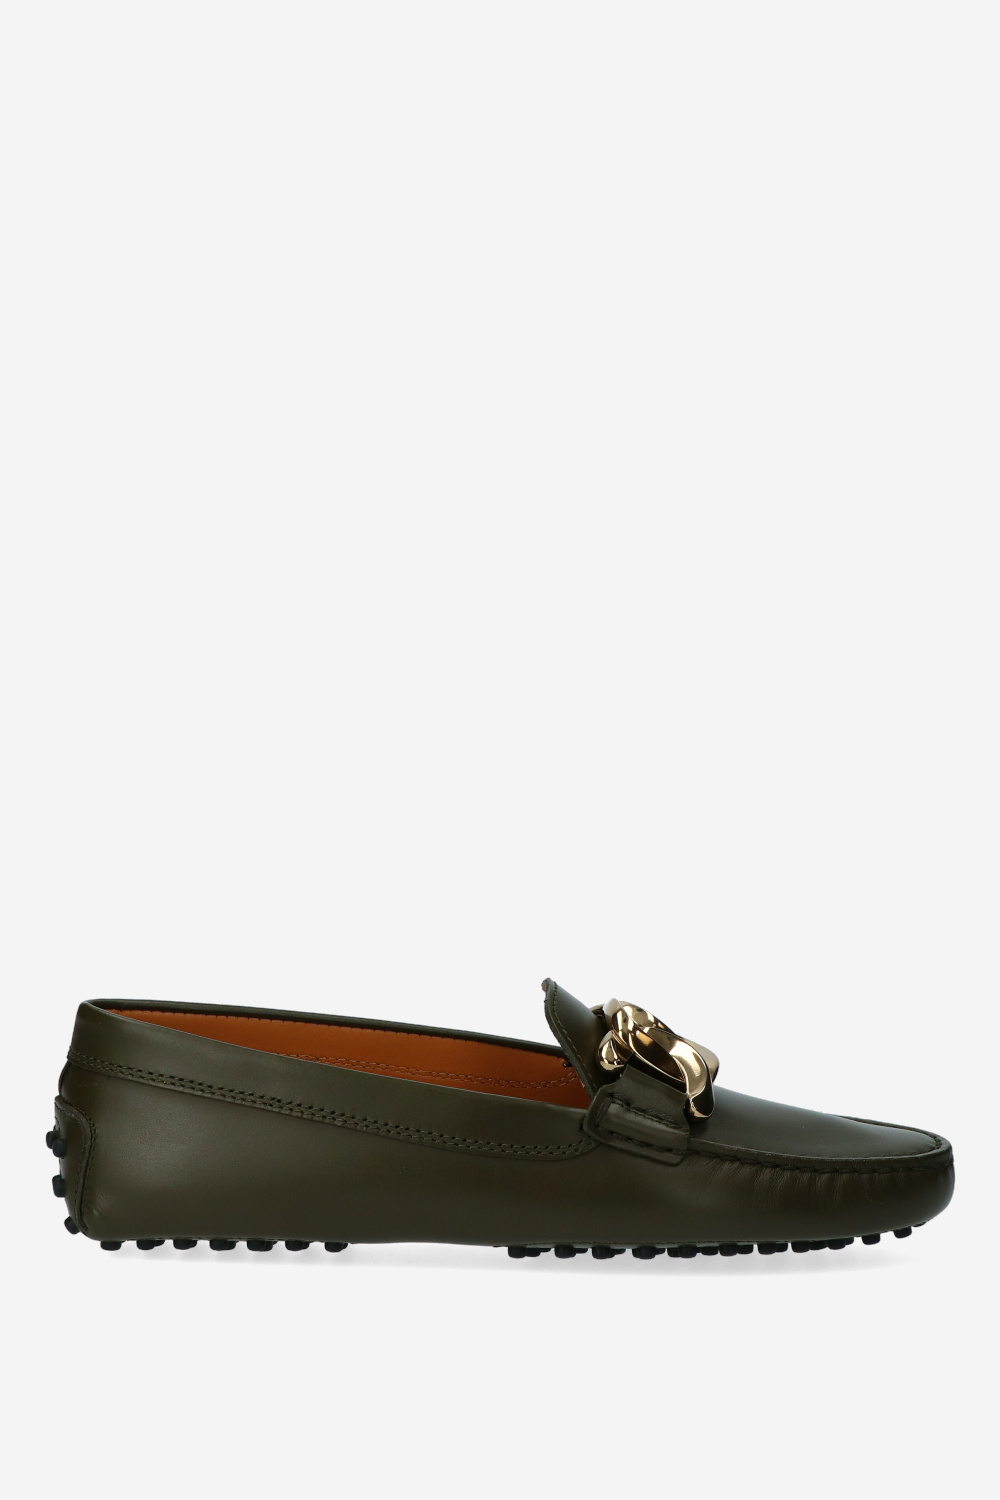 Tods Loafers at Mayke.com